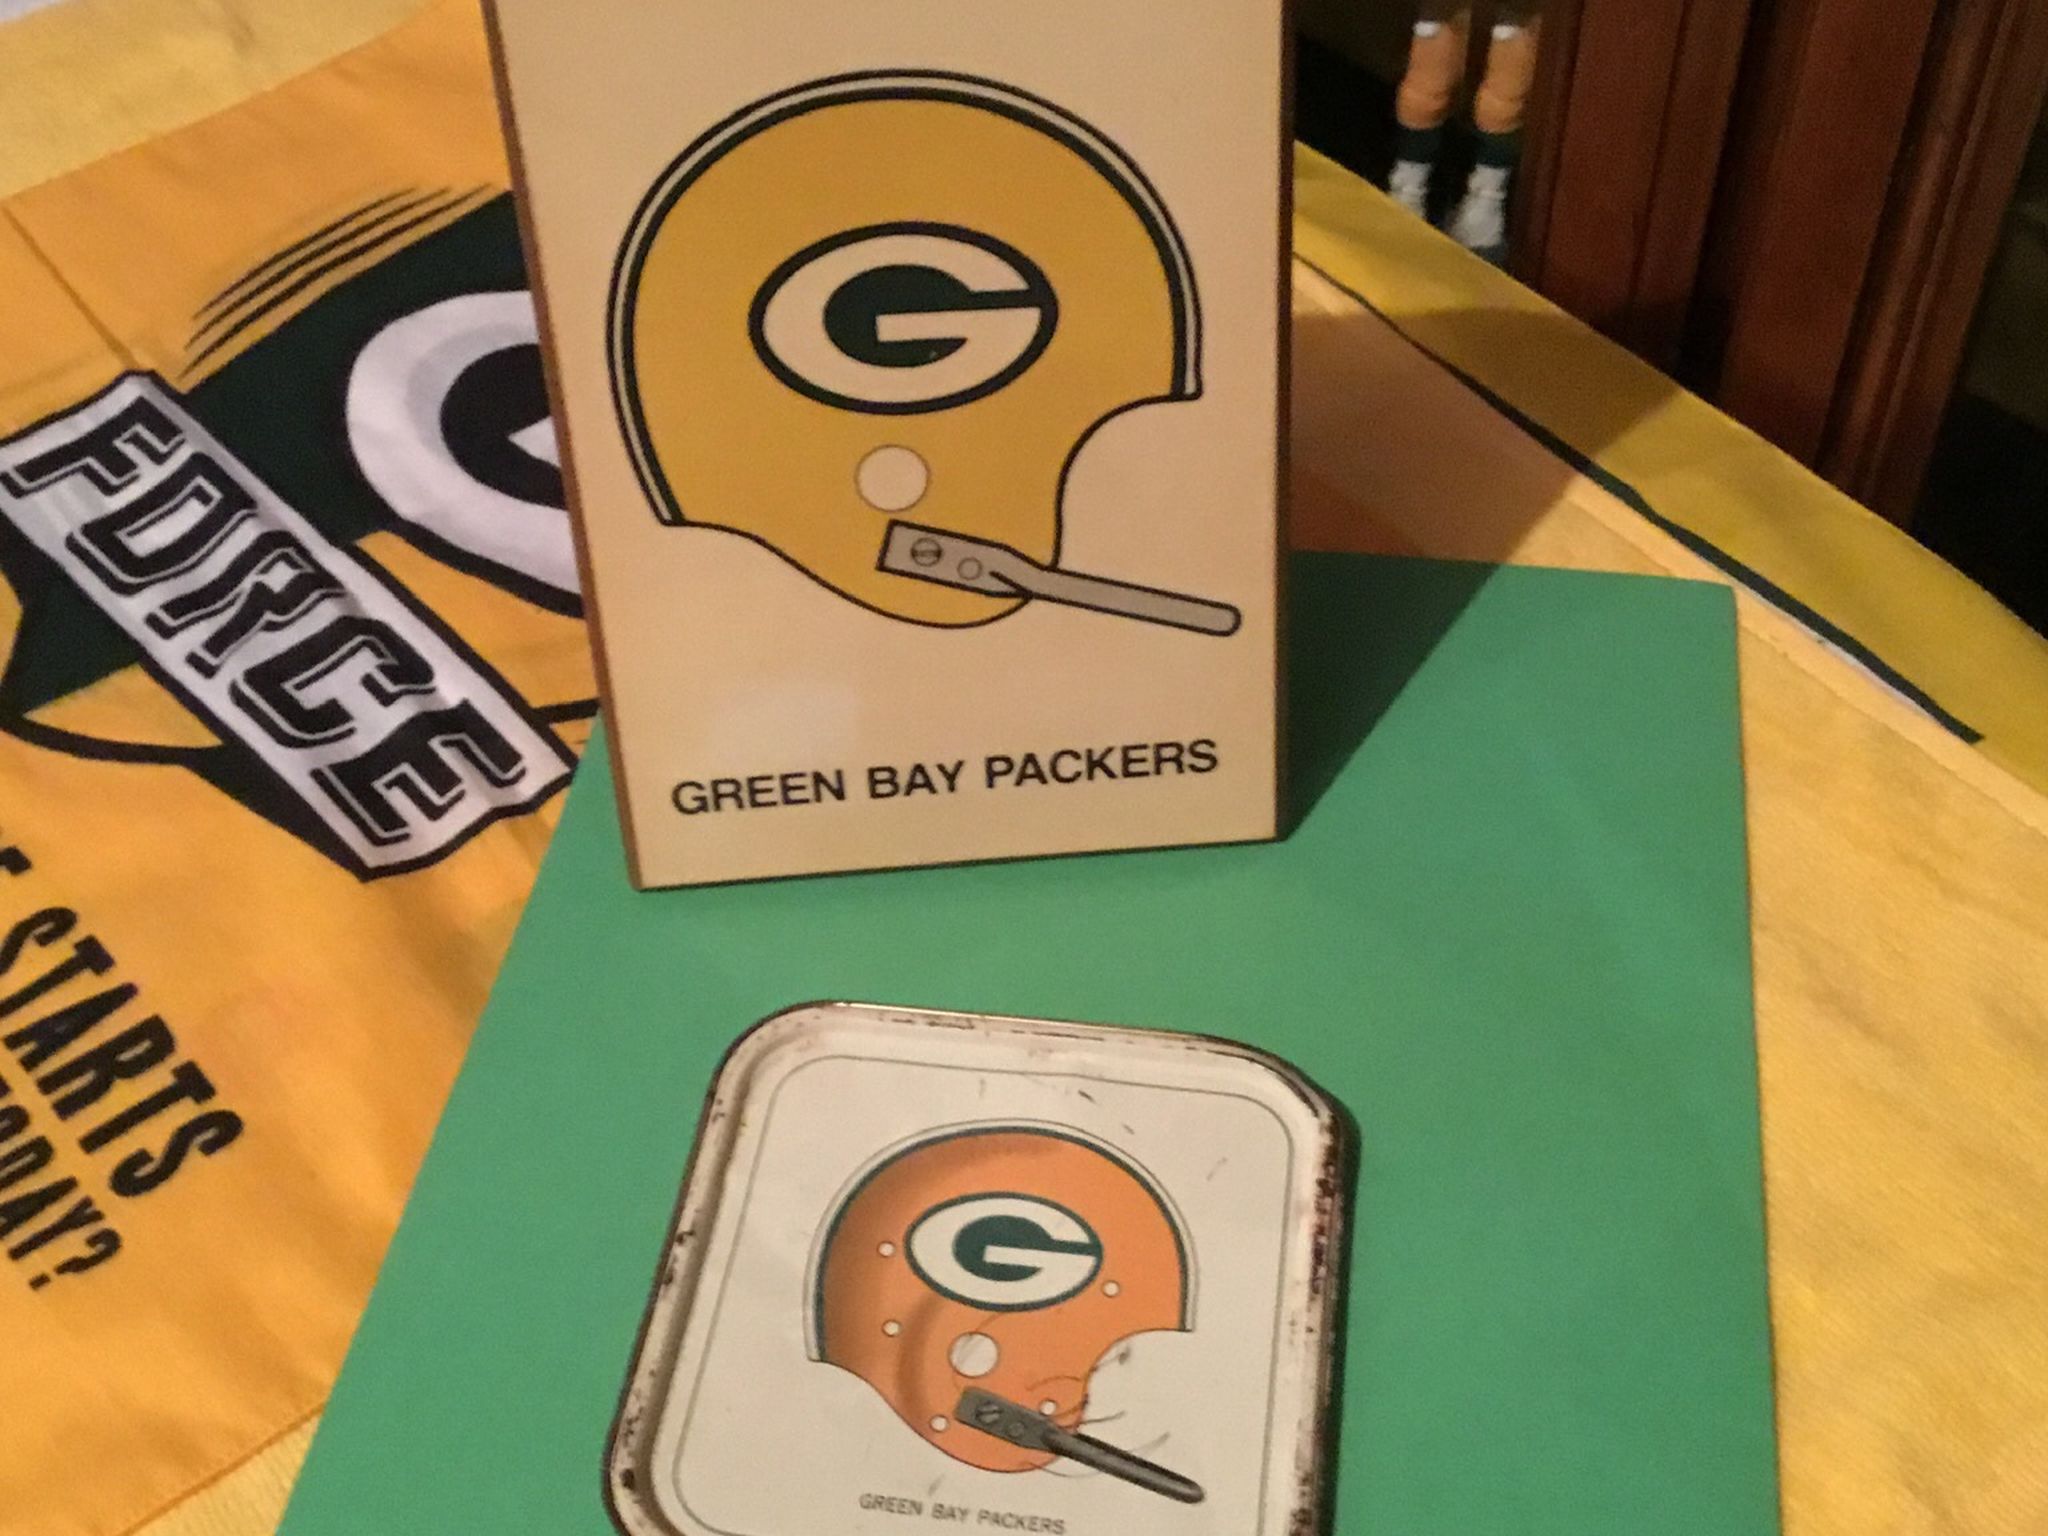 1960’s Packer Plaque & Metal Tray